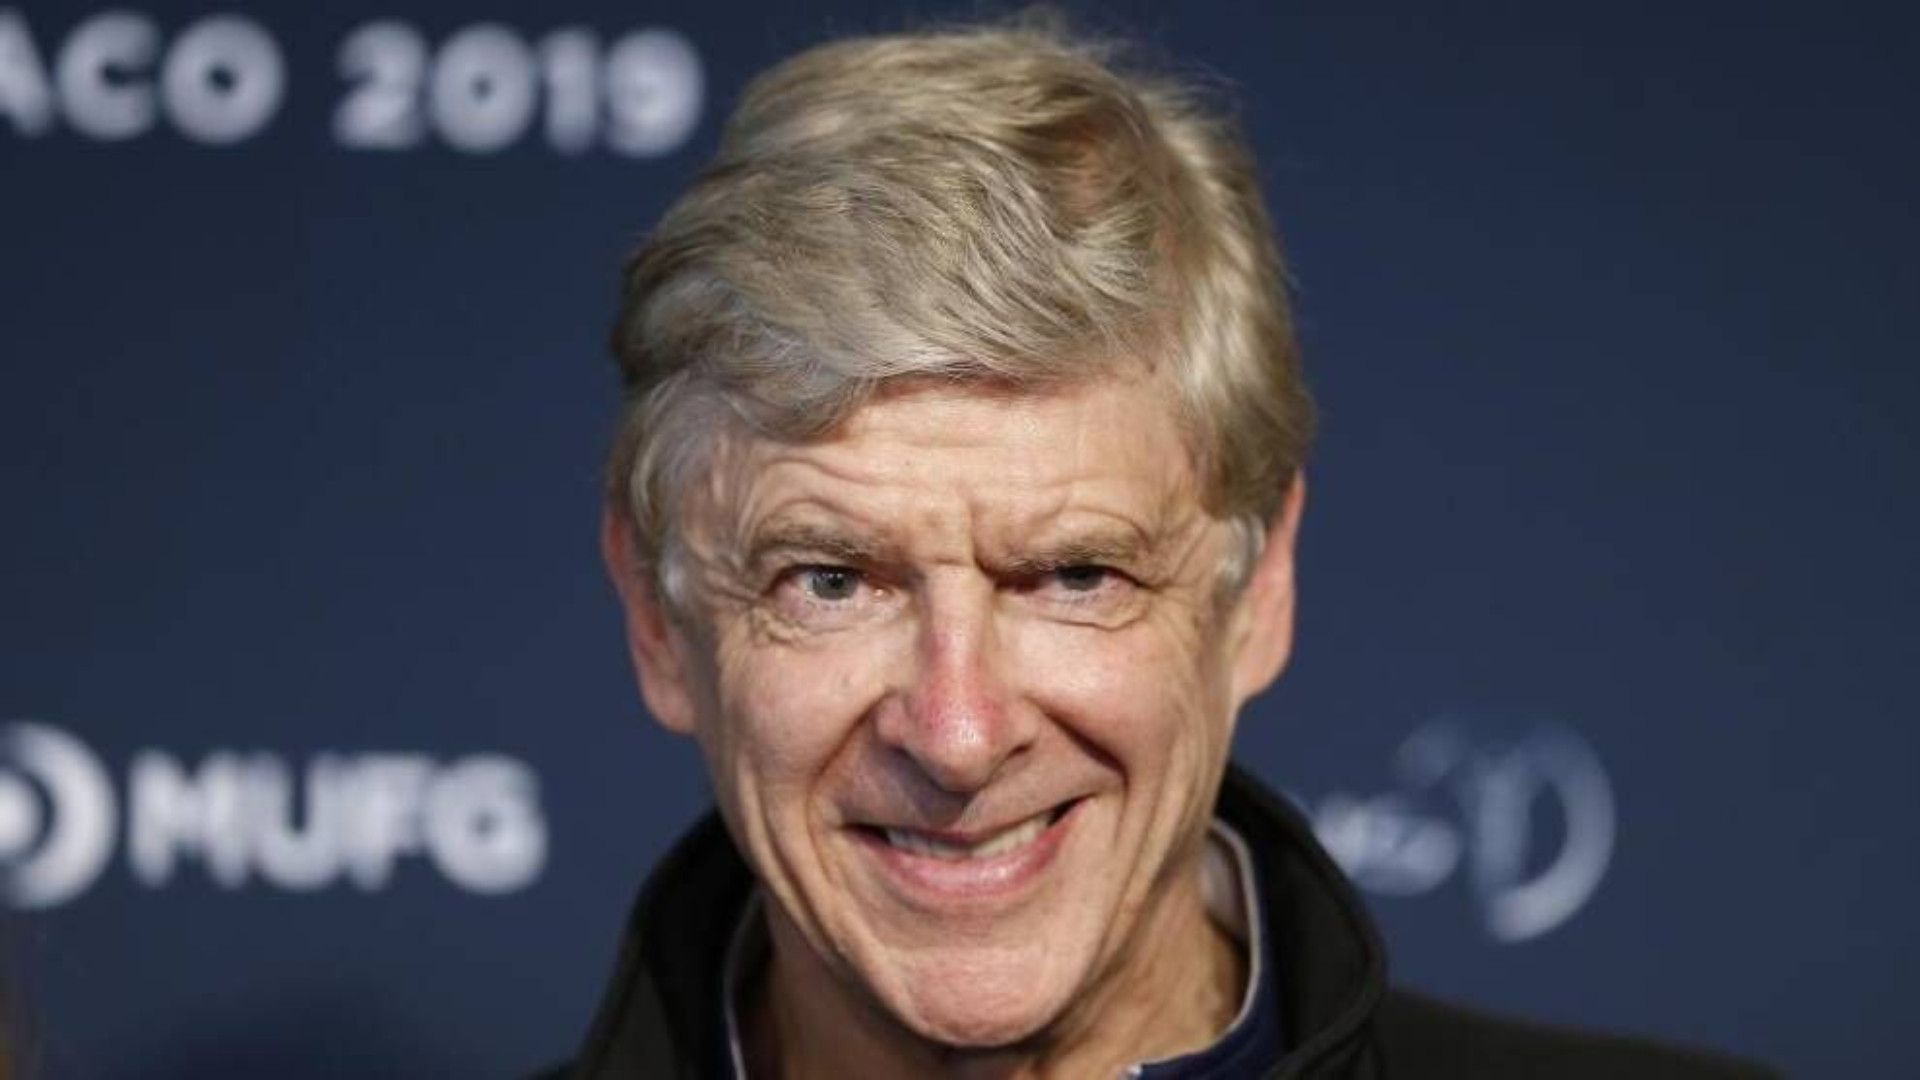 Arsene Wenger in a file photo. (Image credit: Twitter)